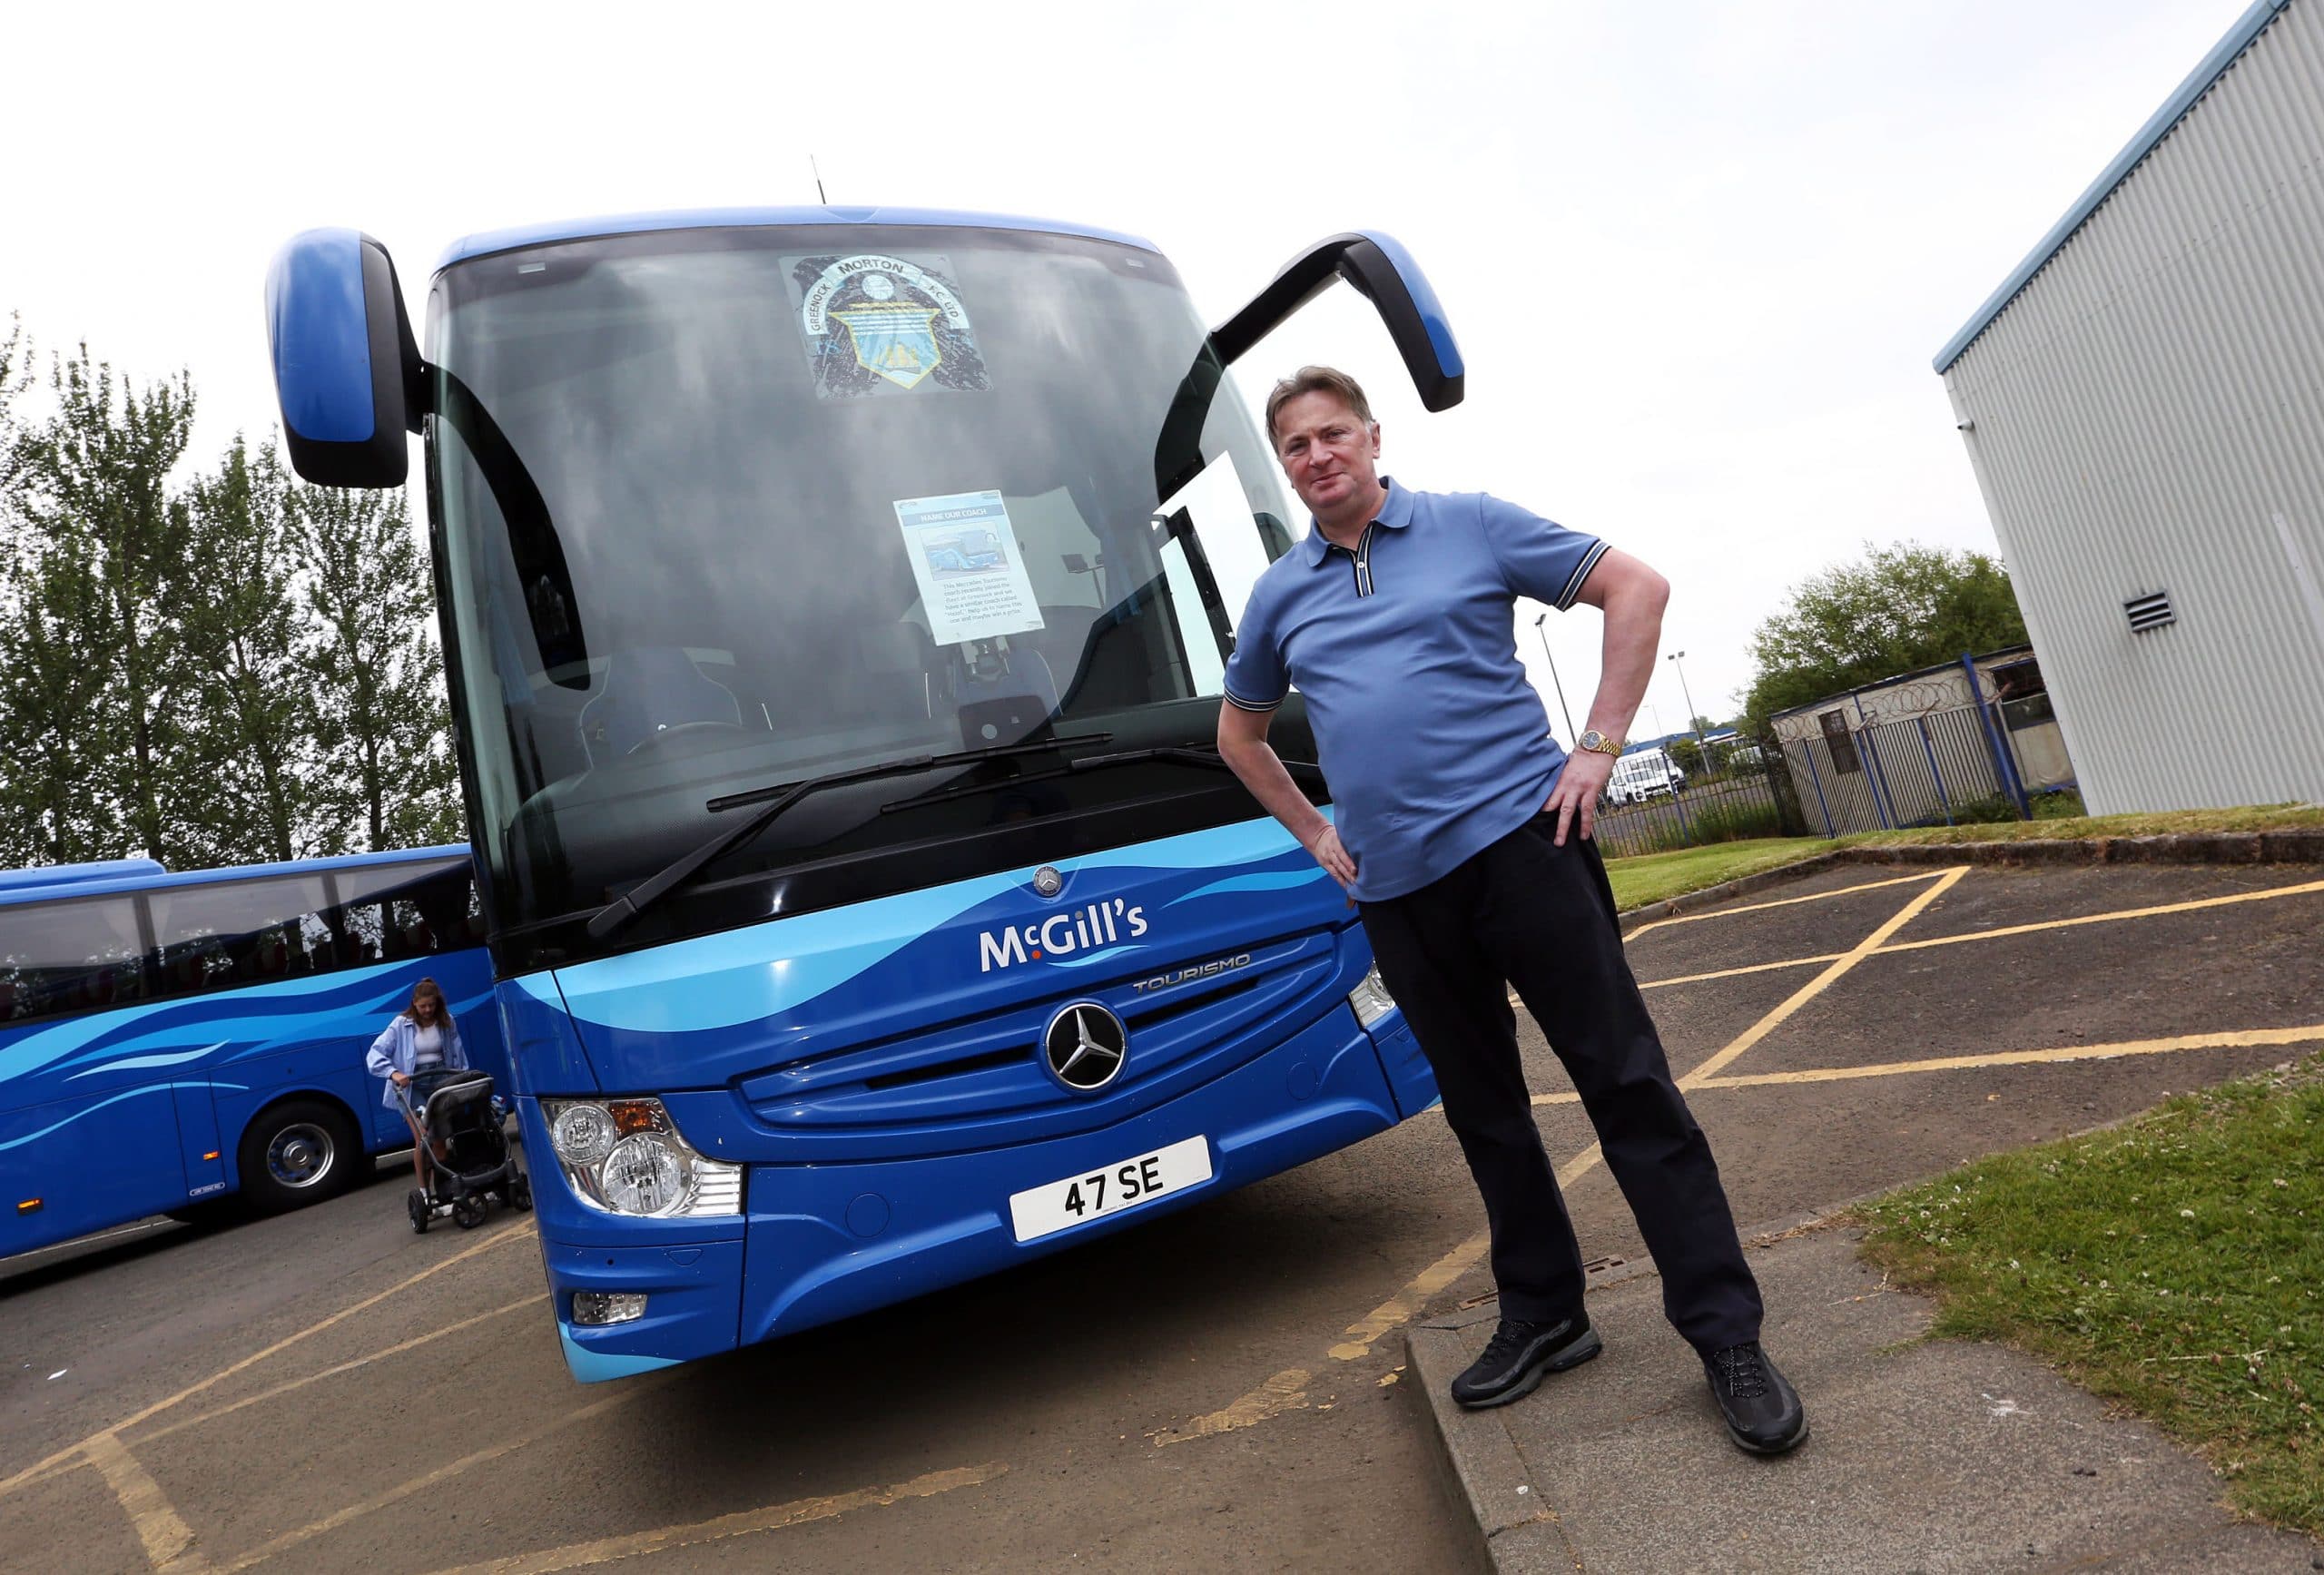 McGills Buses celebrates 20 years of serving Inverclyde